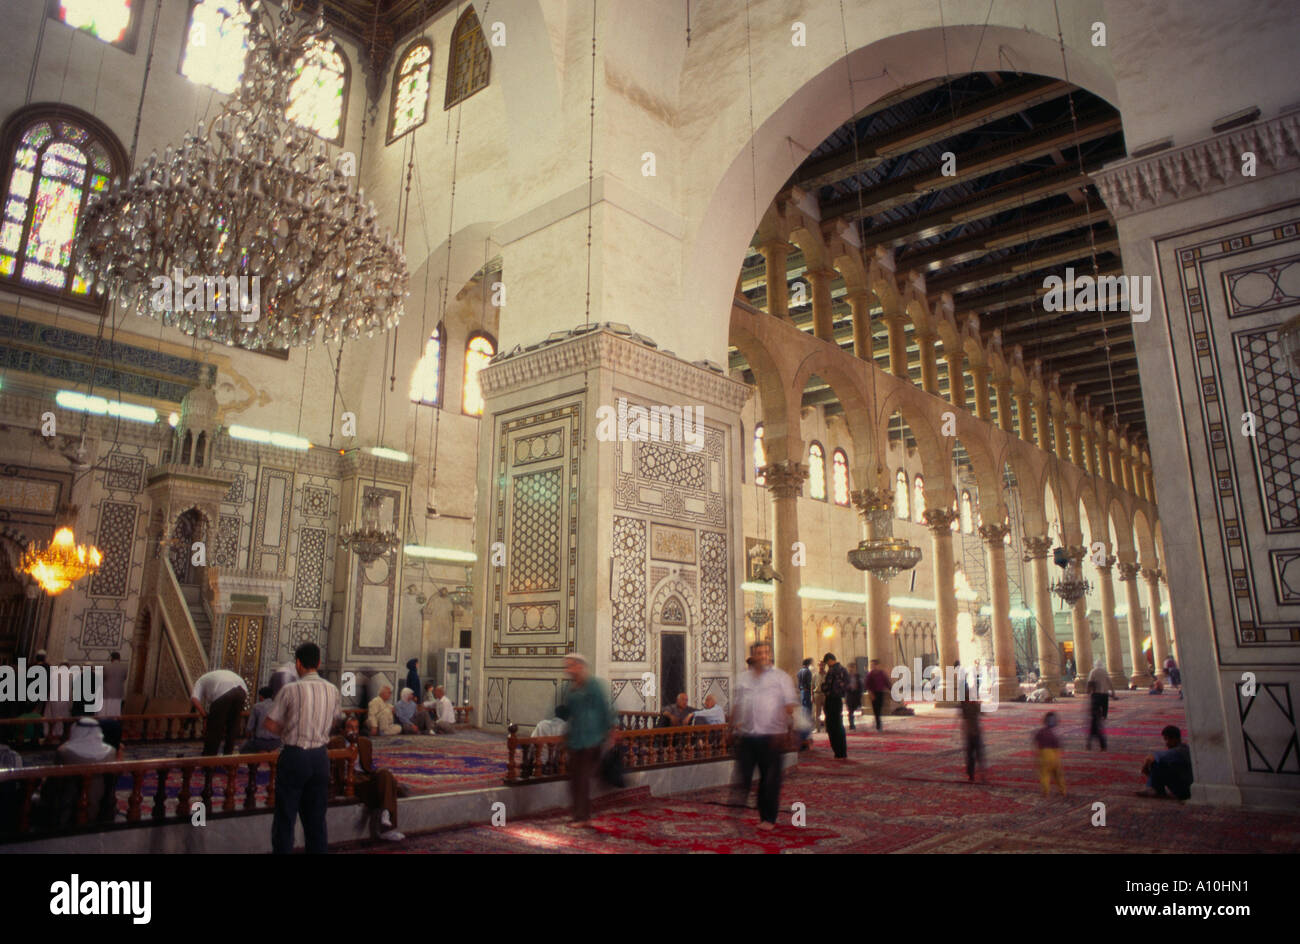 Syria Damascus Omayad Mosque Interior large view with arches and people Stock Photo